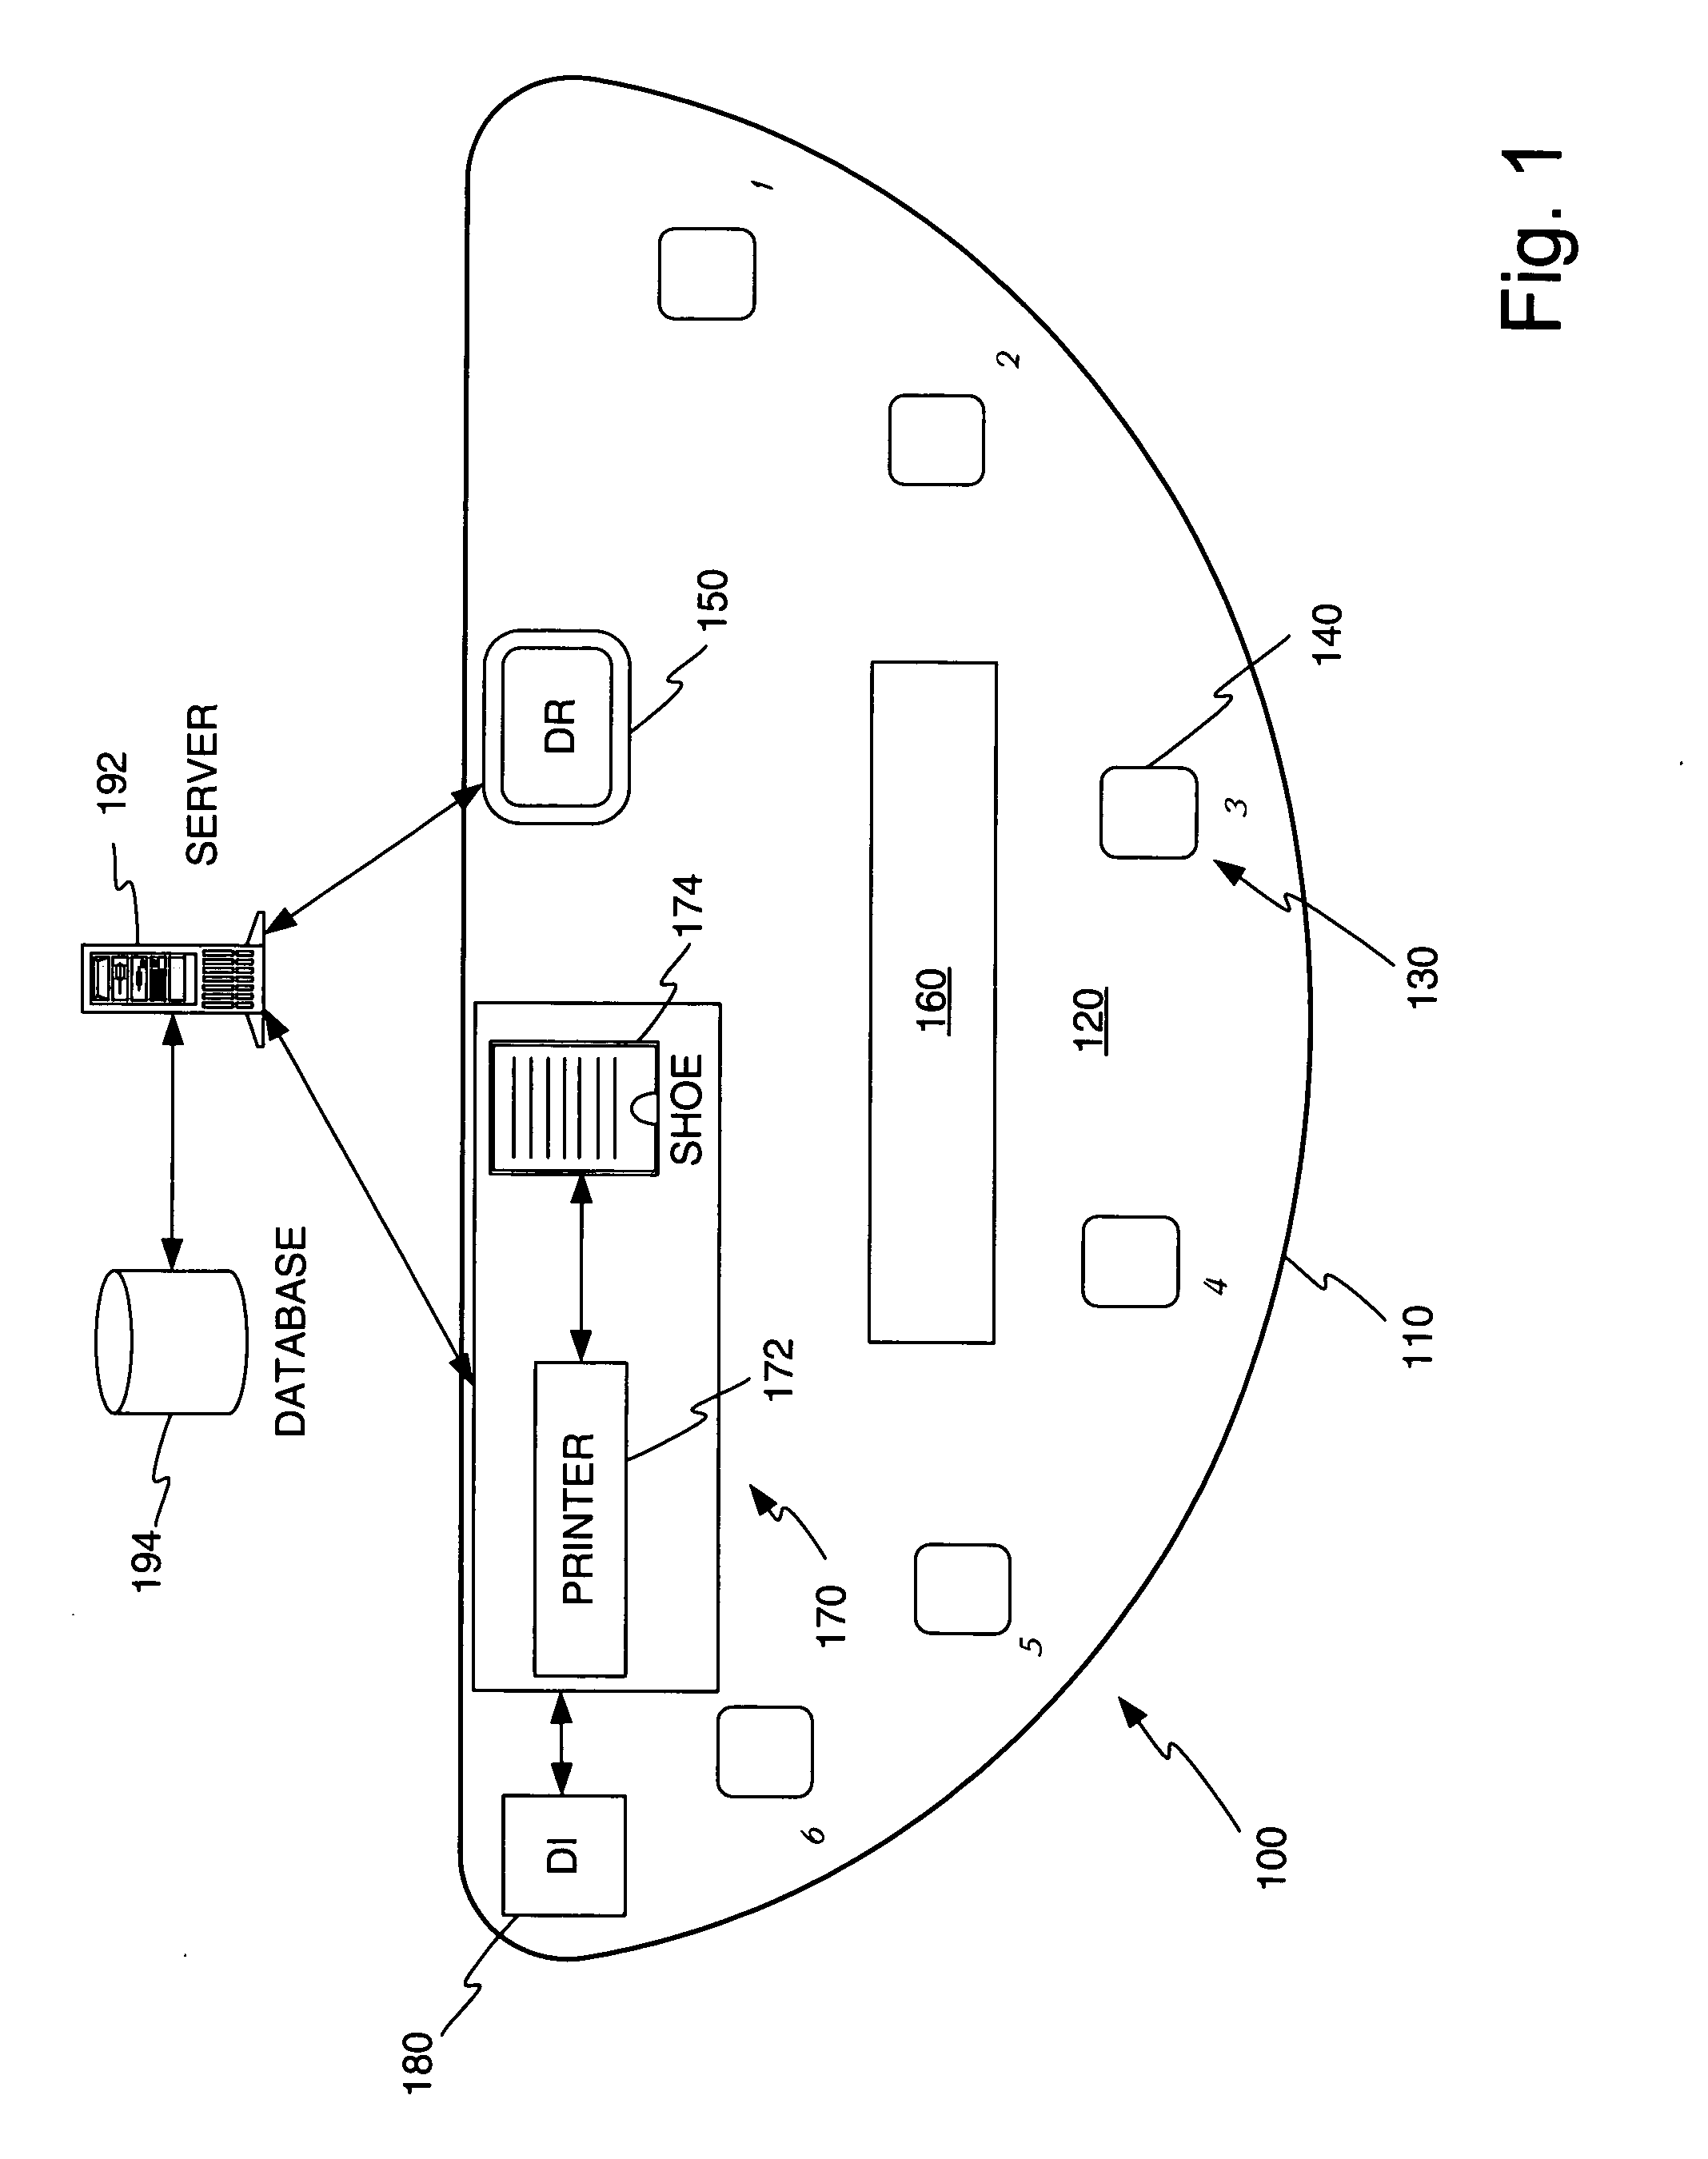 Method and apparatus for card printing